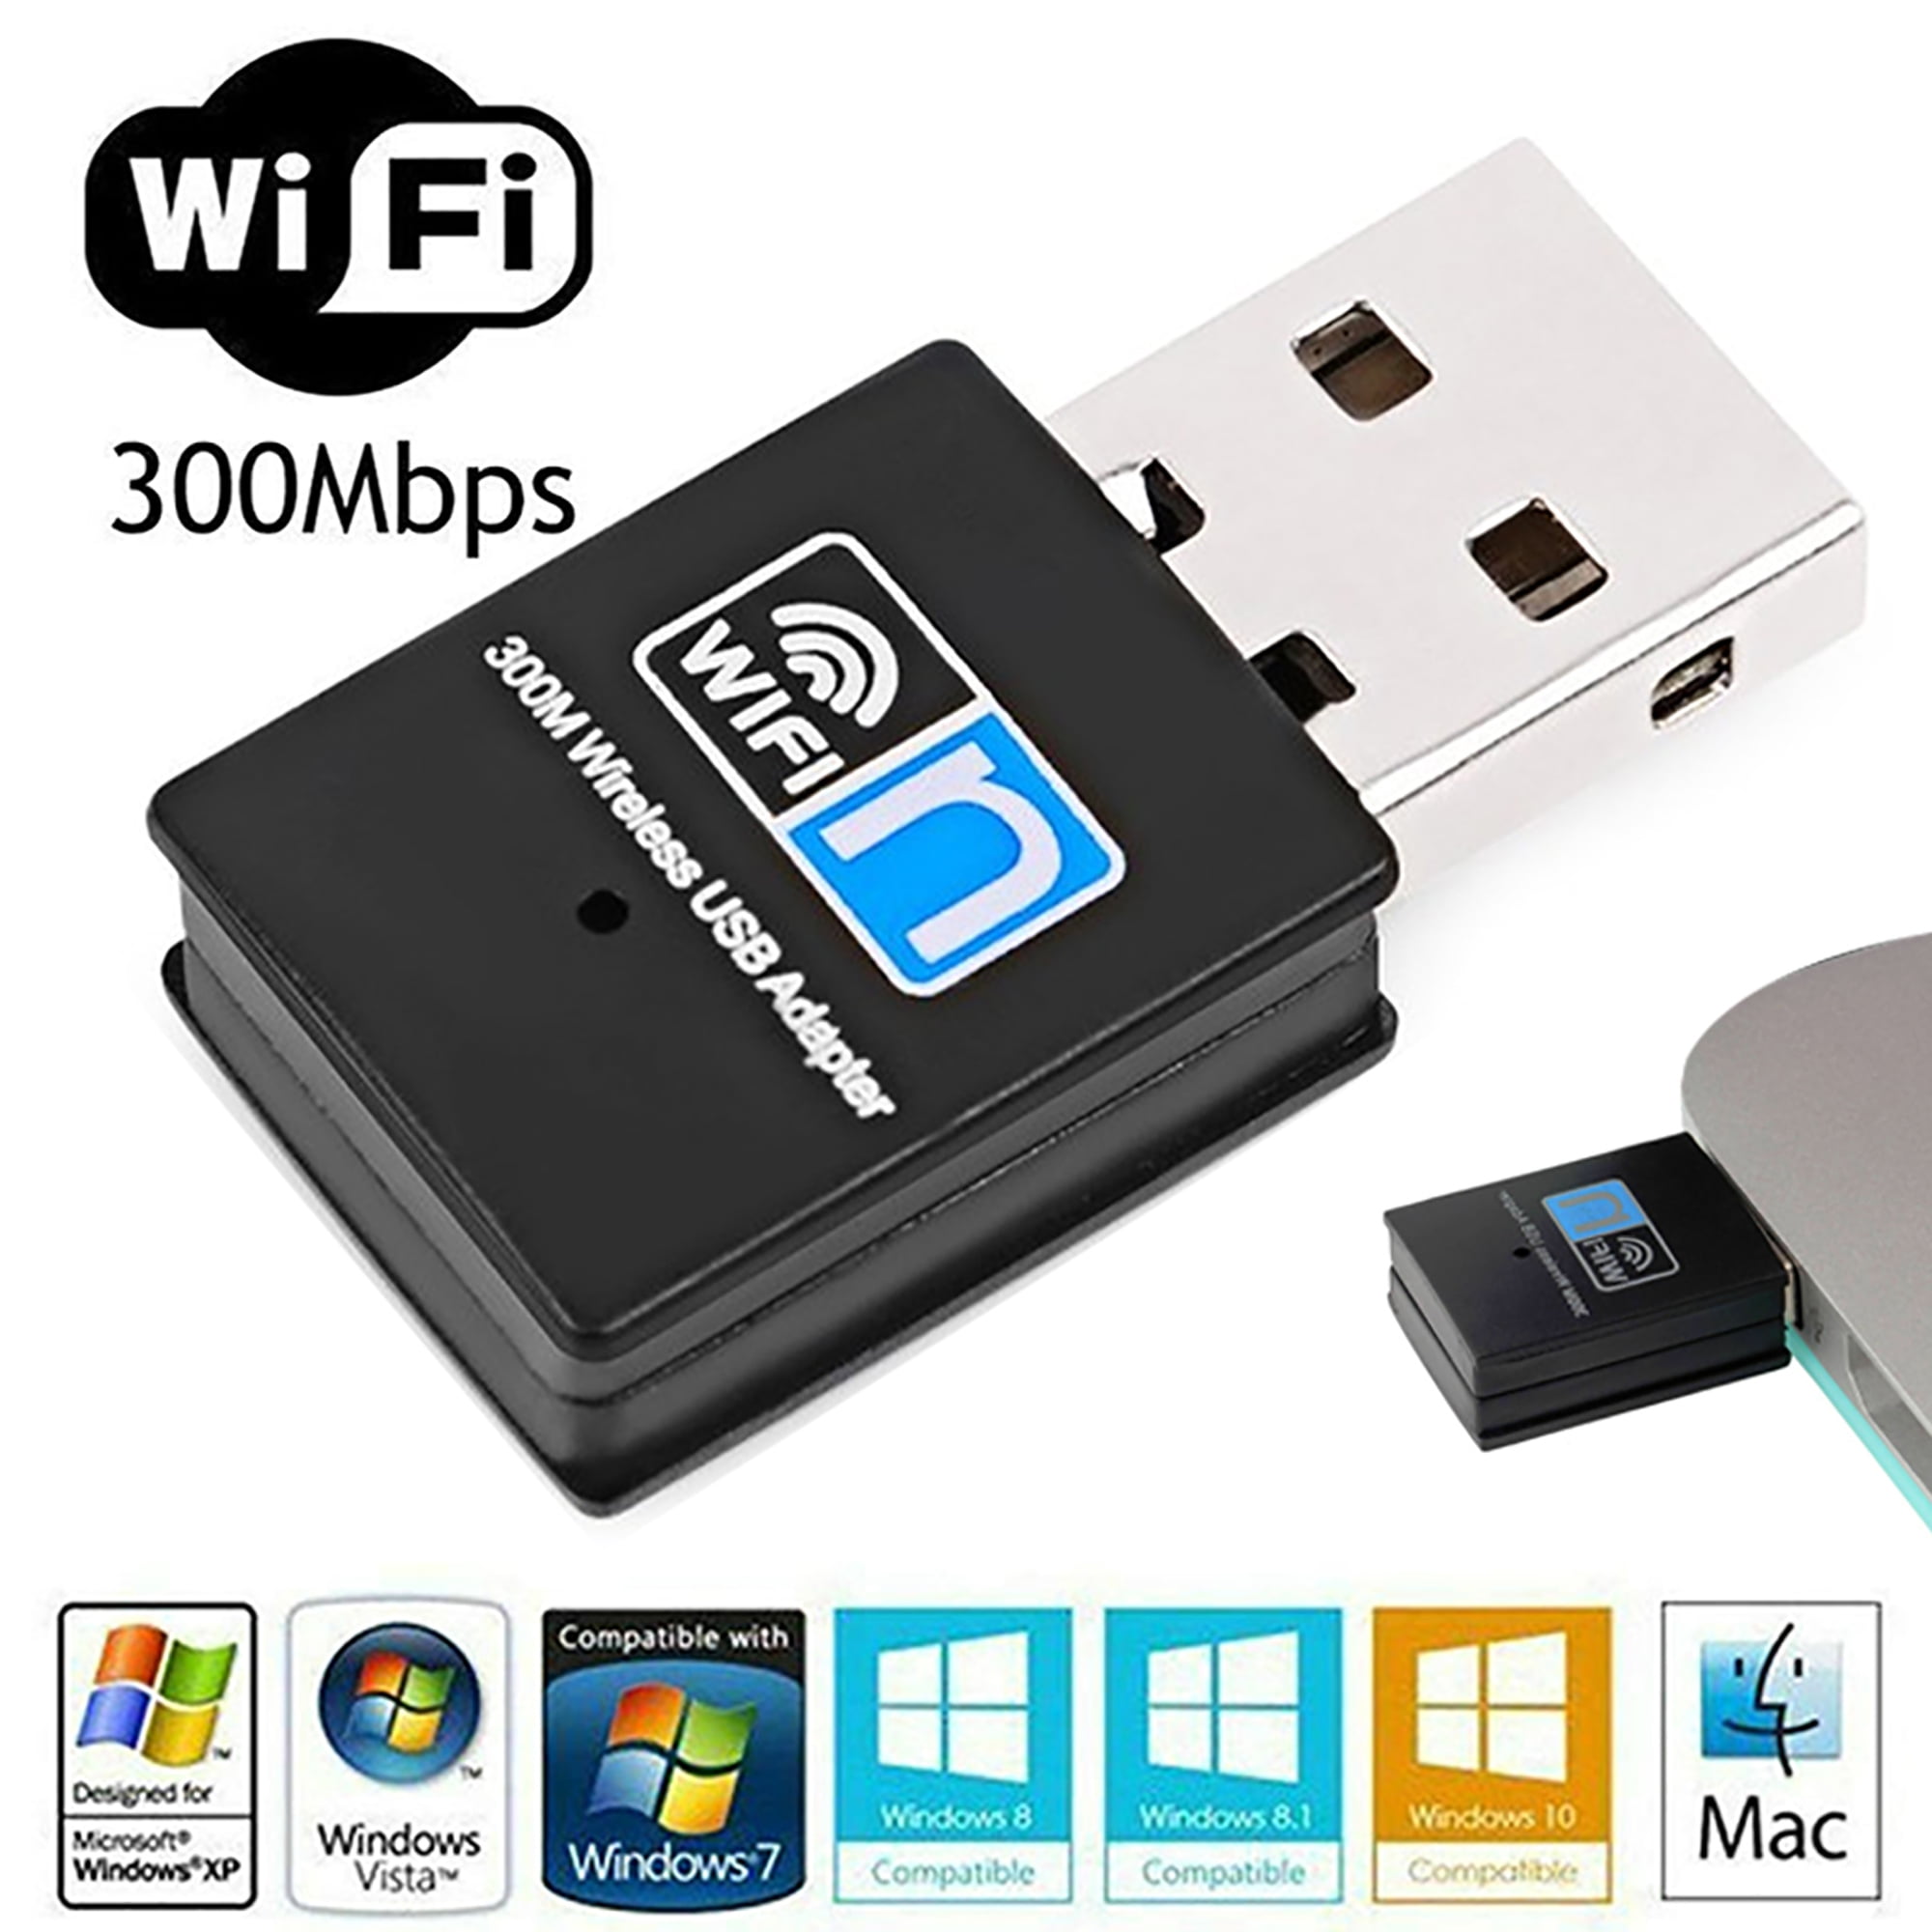 Wireless Smart TV WiFi Mini USB Adapter 300Mbps for Network PC Laptop Dongle 